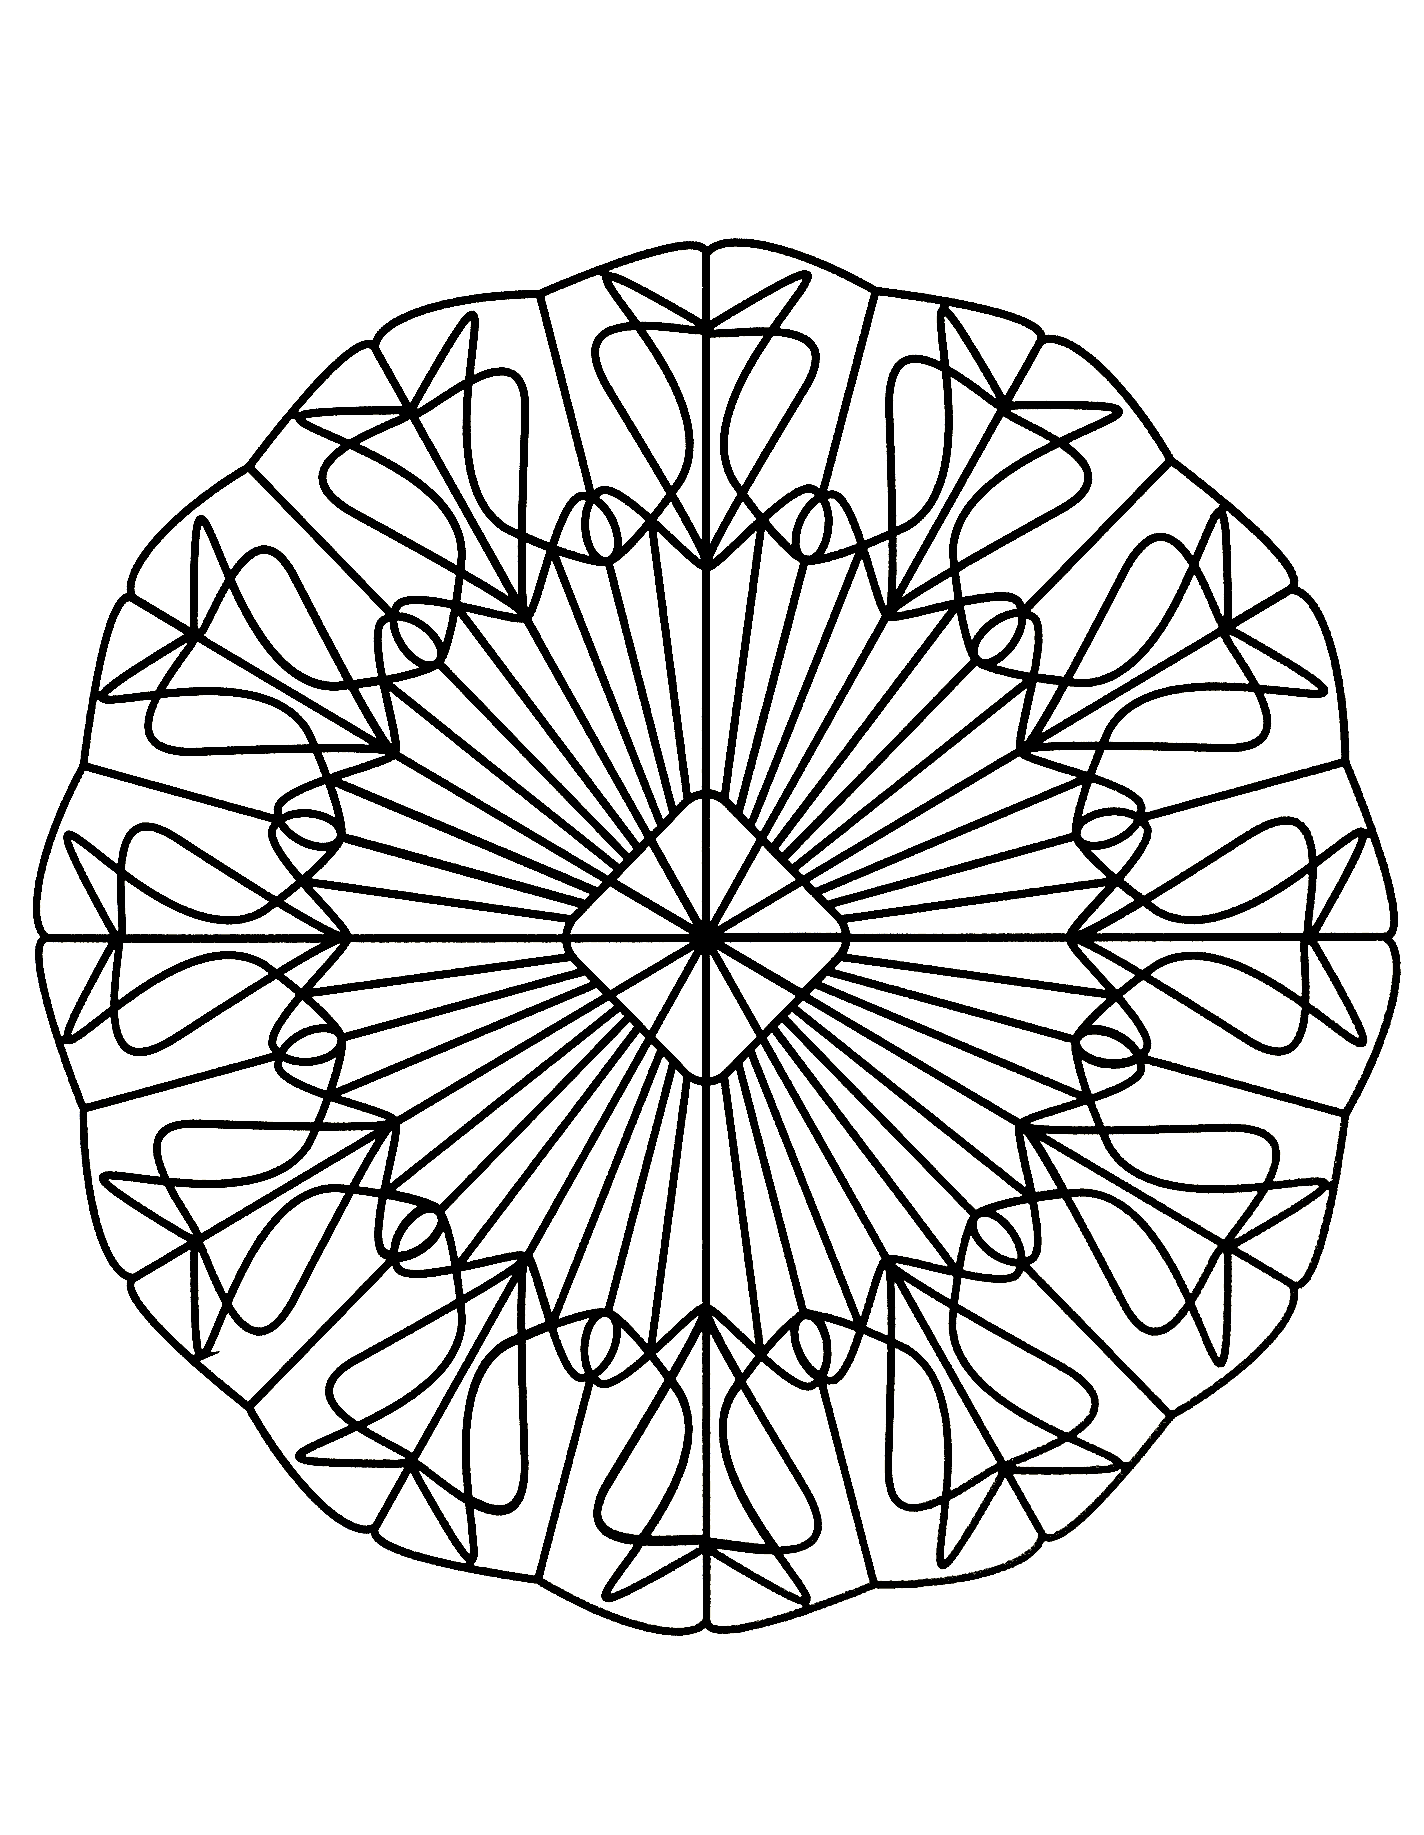 A Mandala coloring page with fine and elegant lines, perfect if you like complex coloring pages, and if you like to express your creativity.